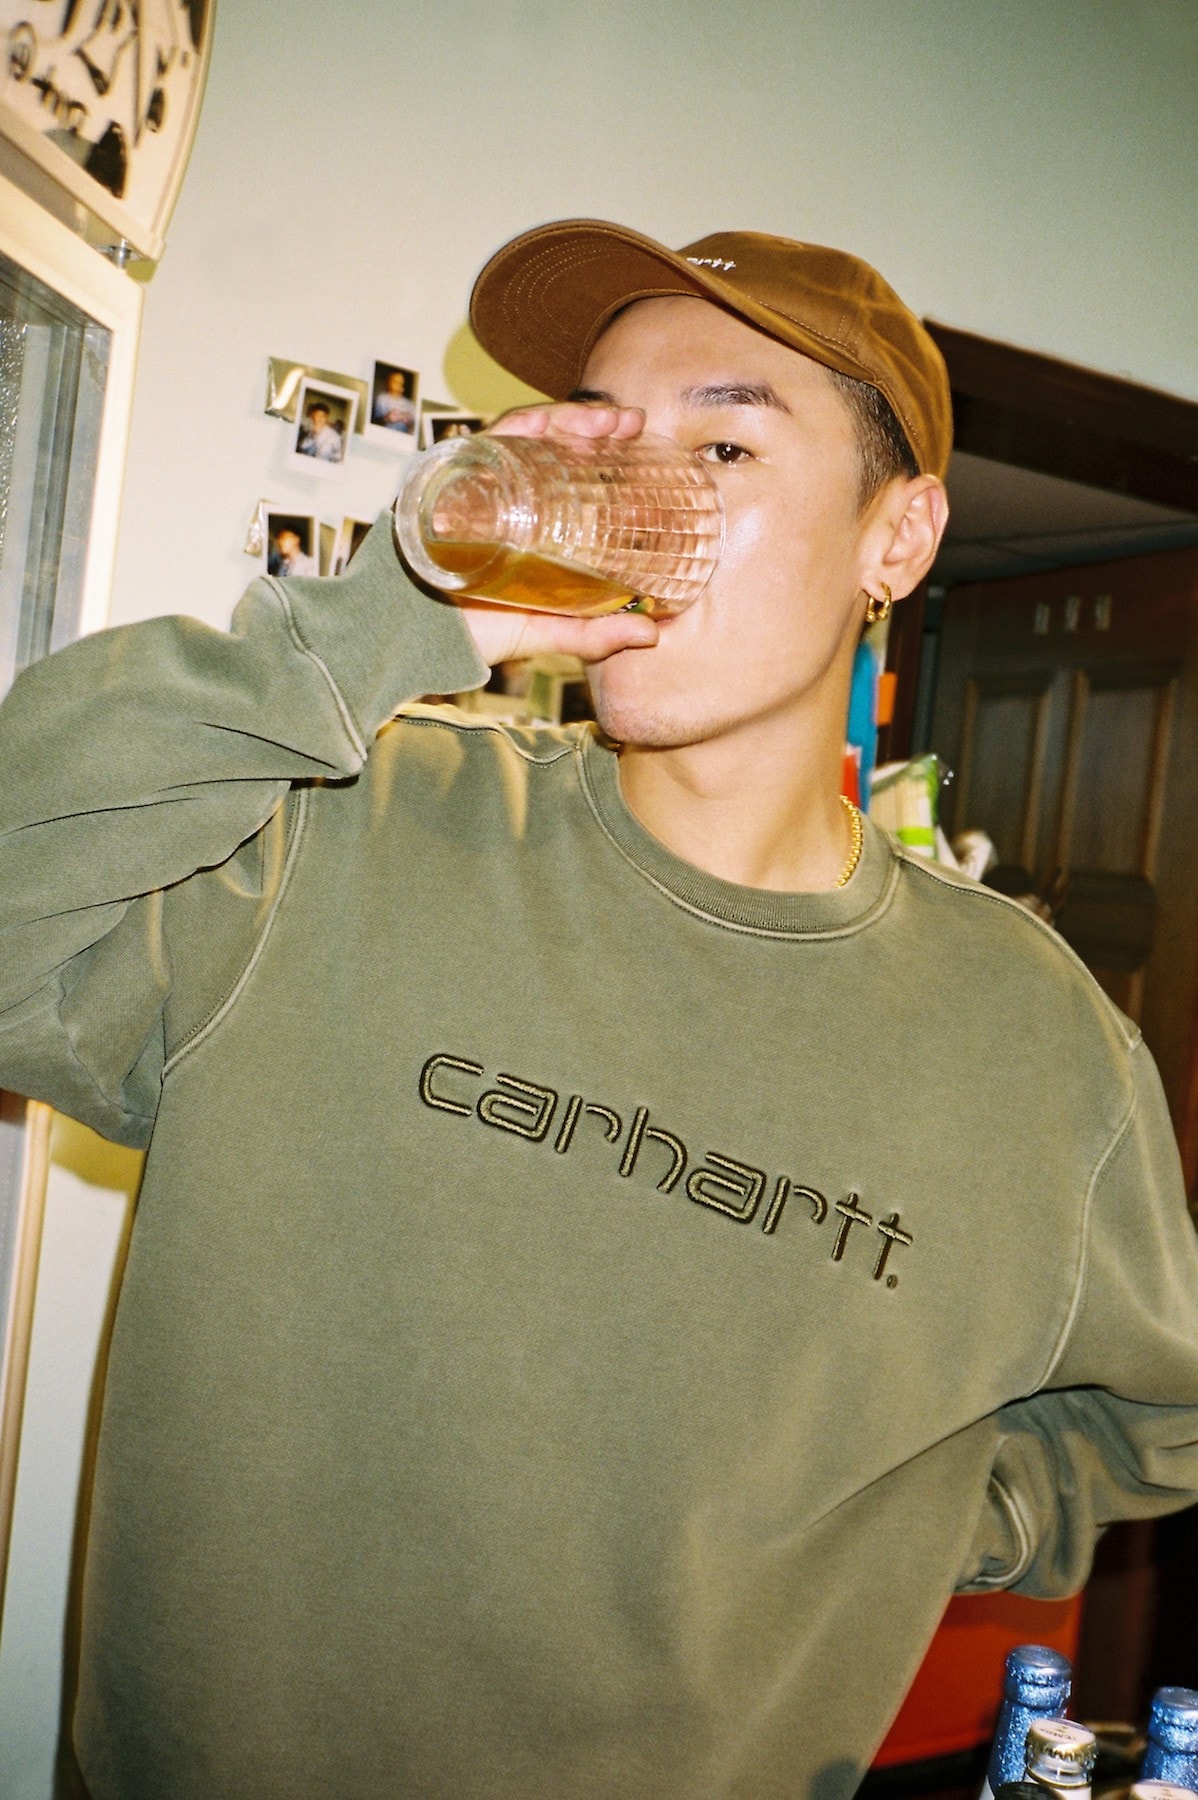 Carhartt WIP 最新 2018 秋季「Exclusive Capsule Collection」系列登場